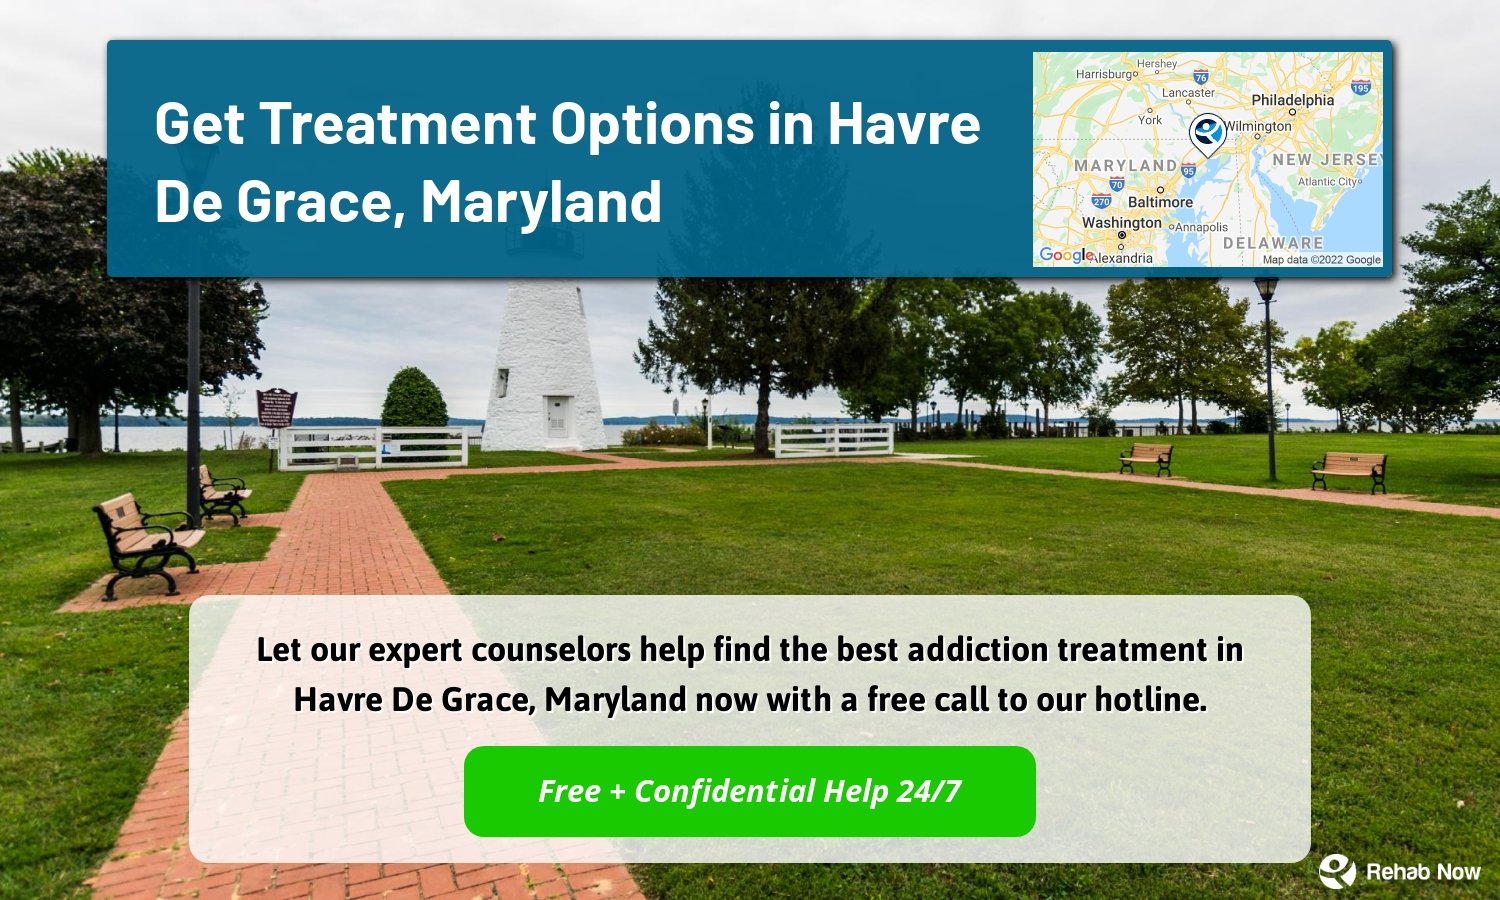 Let our expert counselors help find the best addiction treatment in Havre De Grace, Maryland now with a free call to our hotline.